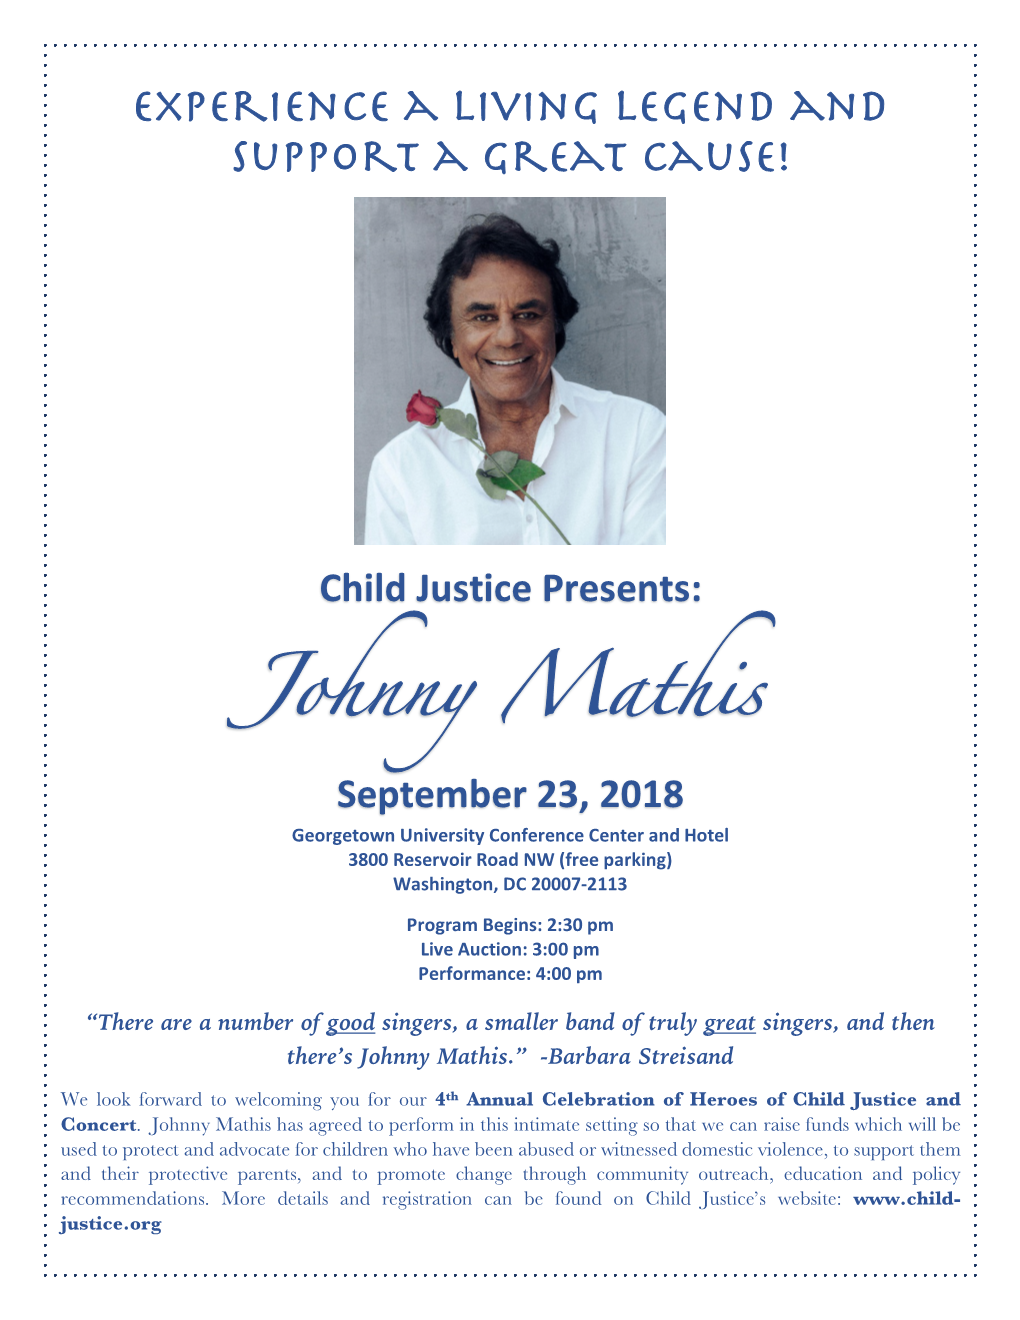 Johnny Mathis September 23, 2018 Georgetown University Conference Center and Hotel 3800 Reservoir Road NW (Free Parking) Washington, DC 20007-2113